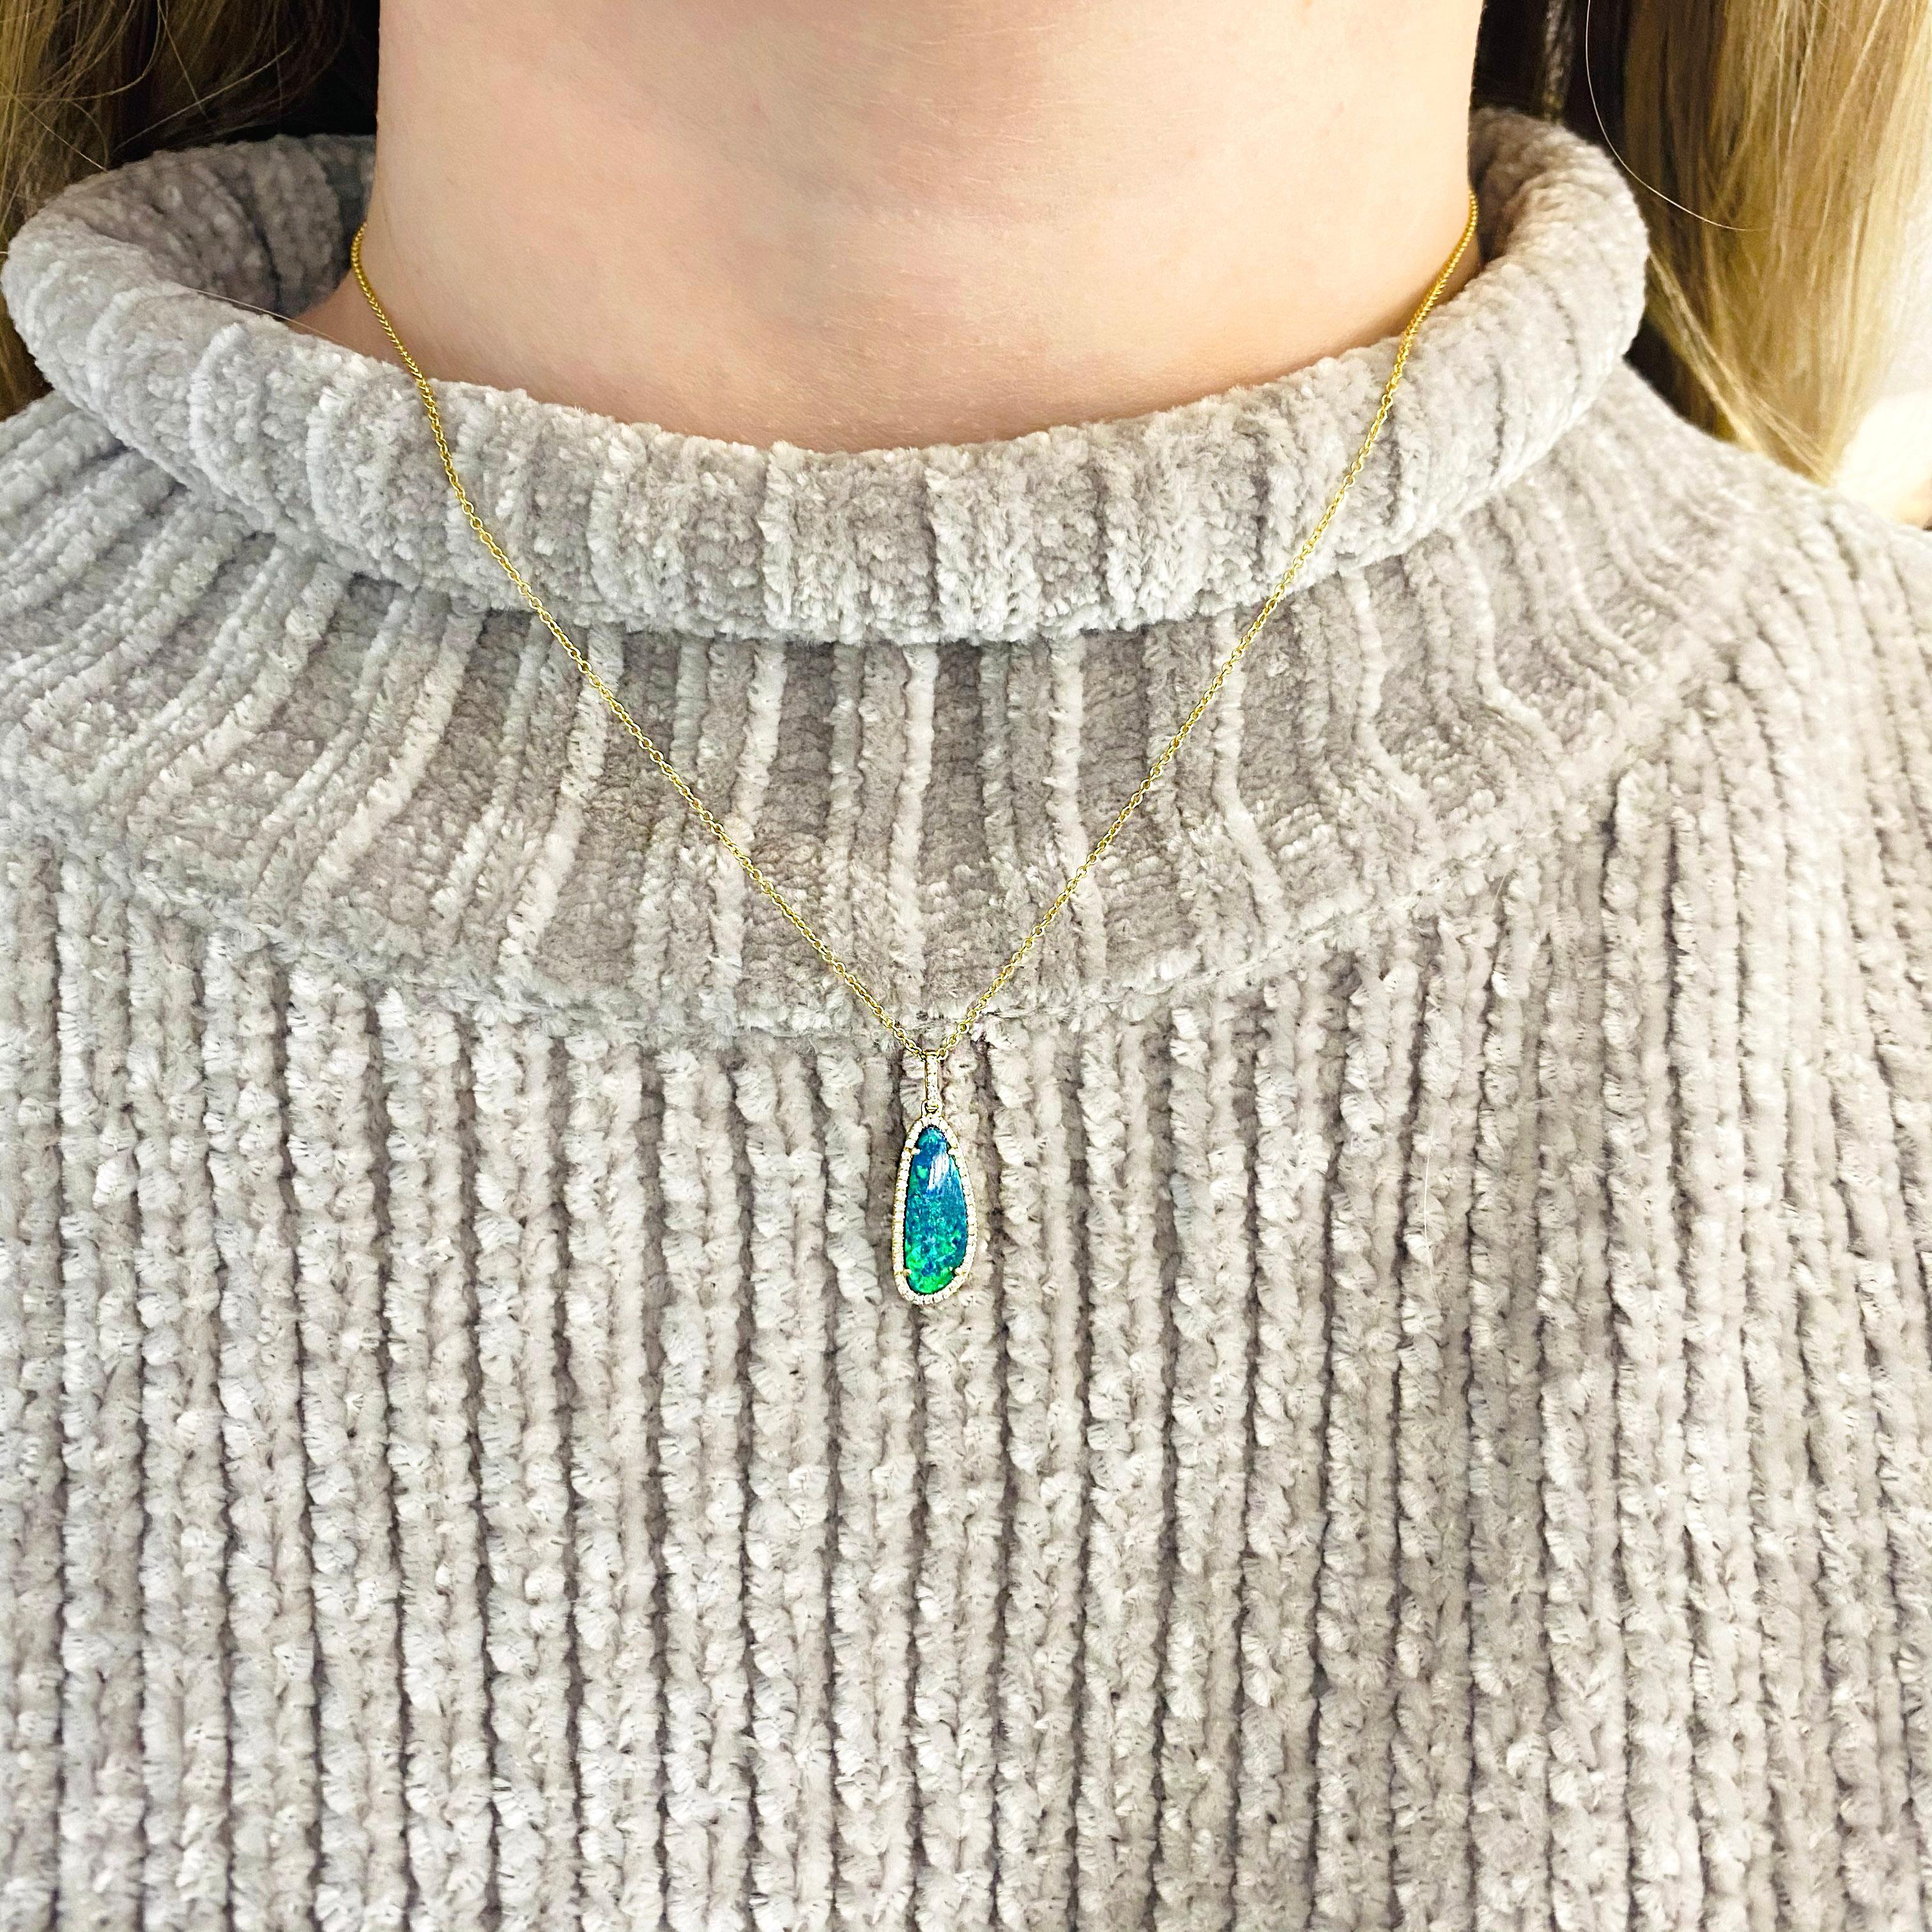 This blue opal pendant has a halo of diamonds around it and is set in a beautiful lush 14 karat gold yellow gold cable chain. This is an amazing bright blue pendant and looks great when layered with other necklaces. Our jeweler makes this pendant